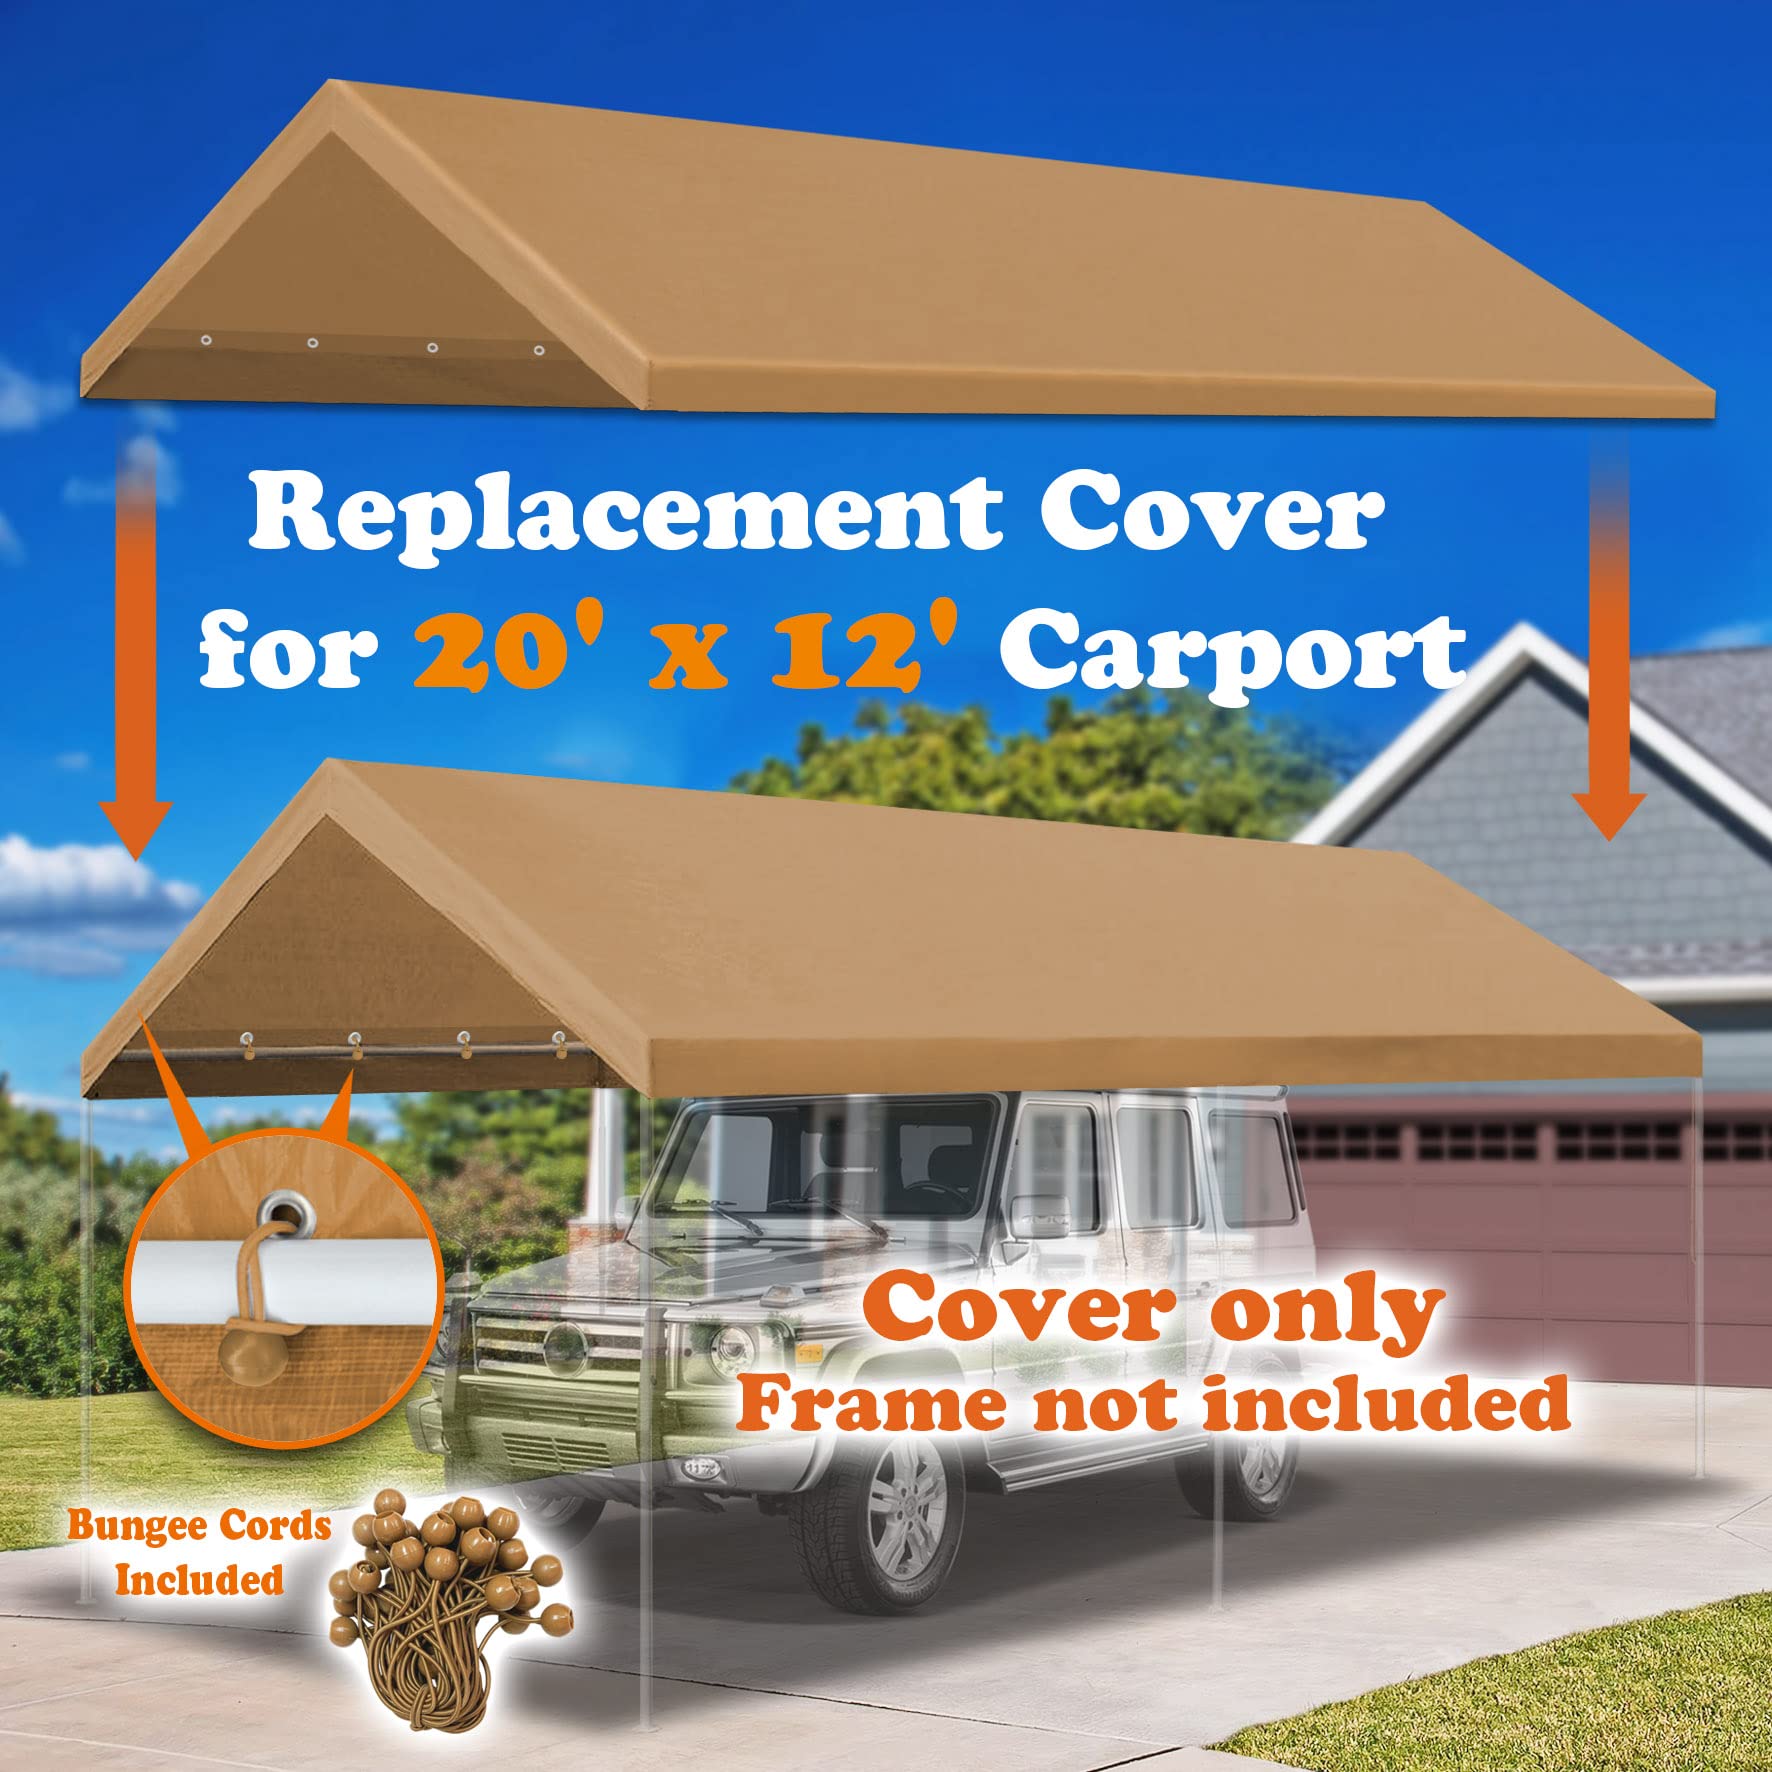 Strong Camel Carport Conopy Cover 12 x 20 Feet Replacement Tent Garage Outdoor Top Tarp Car Shelter with Ball Bungees Tan (with Edge, Frame Not Included)